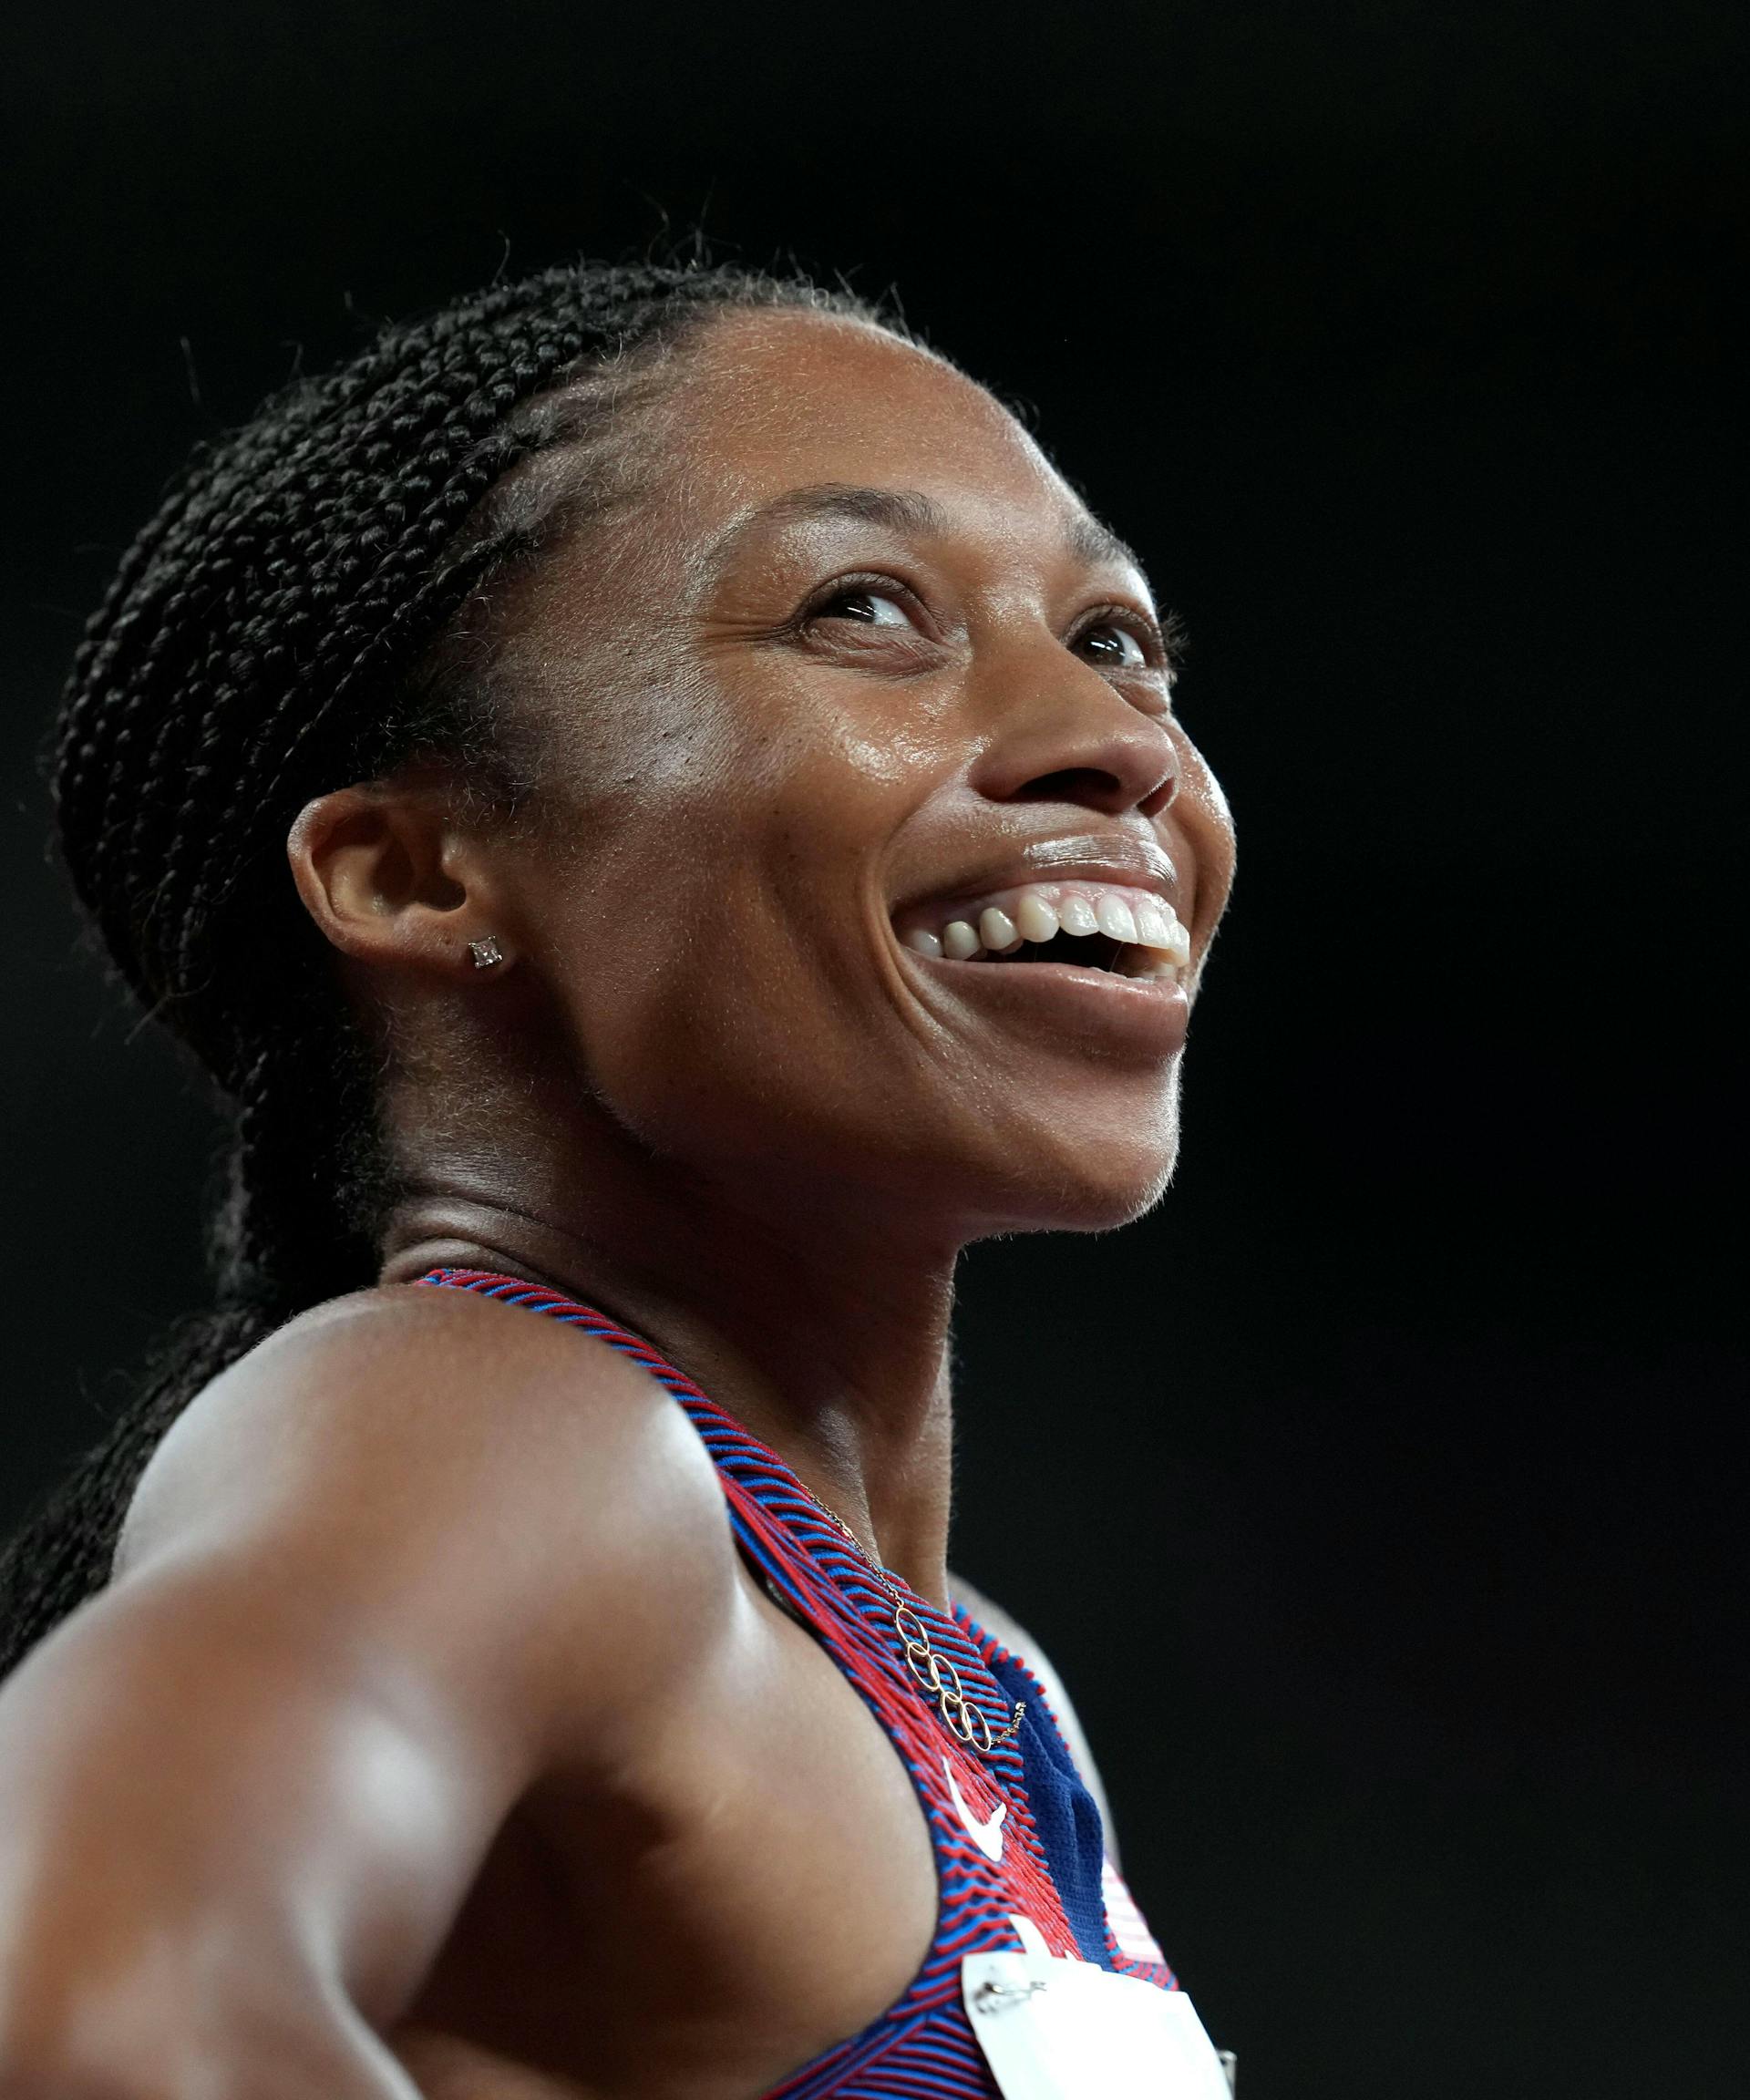 Olympian Allyson Felix Pens Inspiring Letter To Her 2-Year-Old Daughter alamy